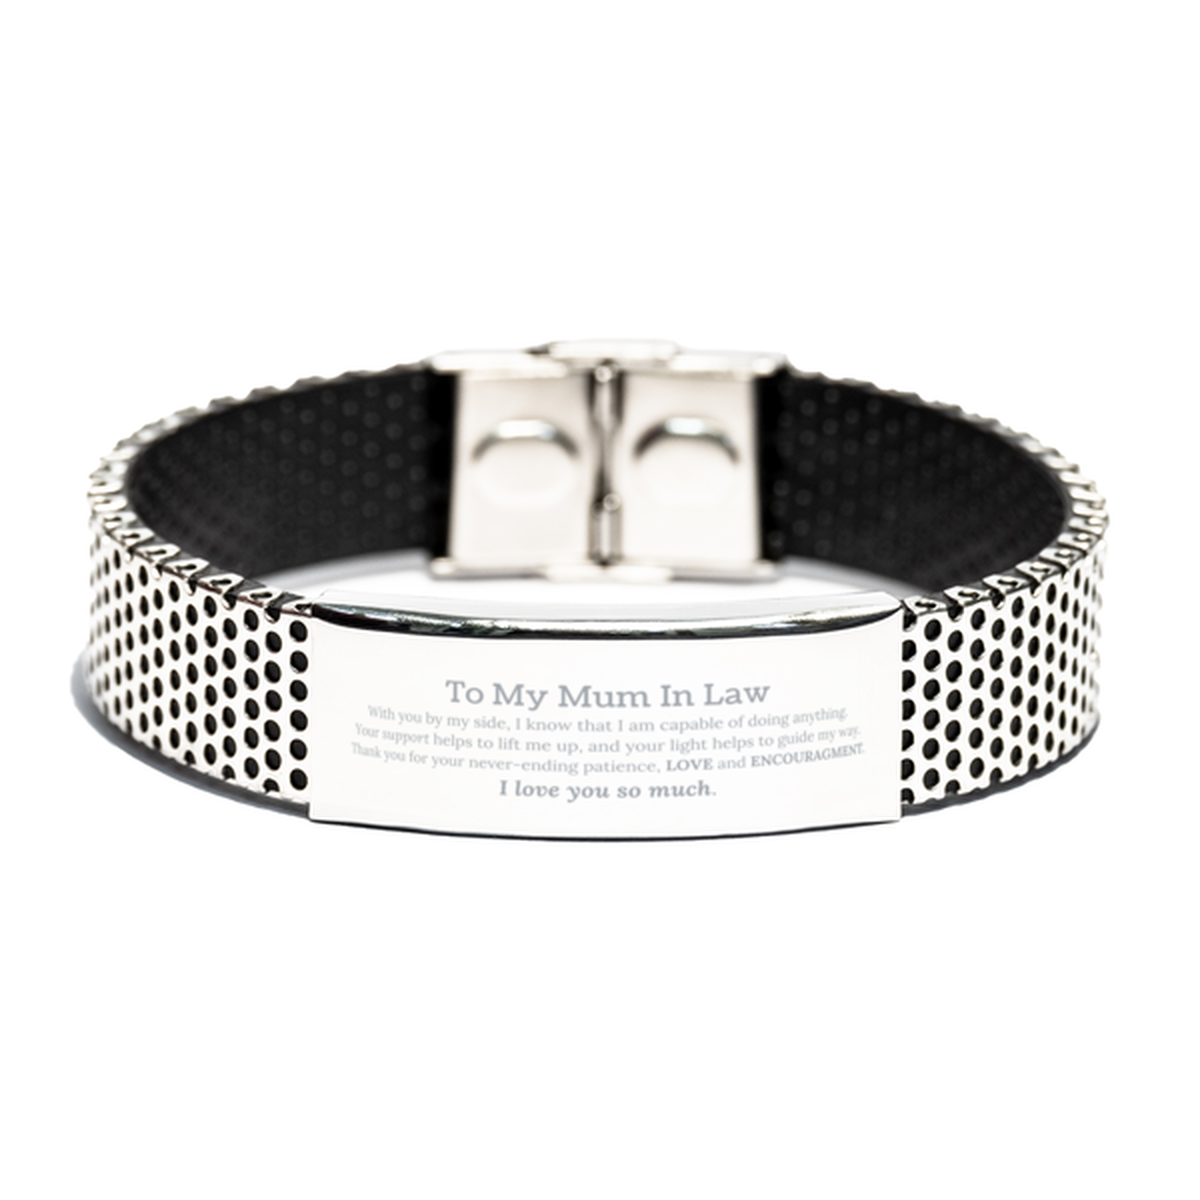 Appreciation Mum In Law  Stainless Steel Bracelet Gifts, To My Mum In Law  Birthday Christmas Wedding Keepsake Gifts for Mum In Law  With you by my side, I know that I am capable of doing anything. I love you so much